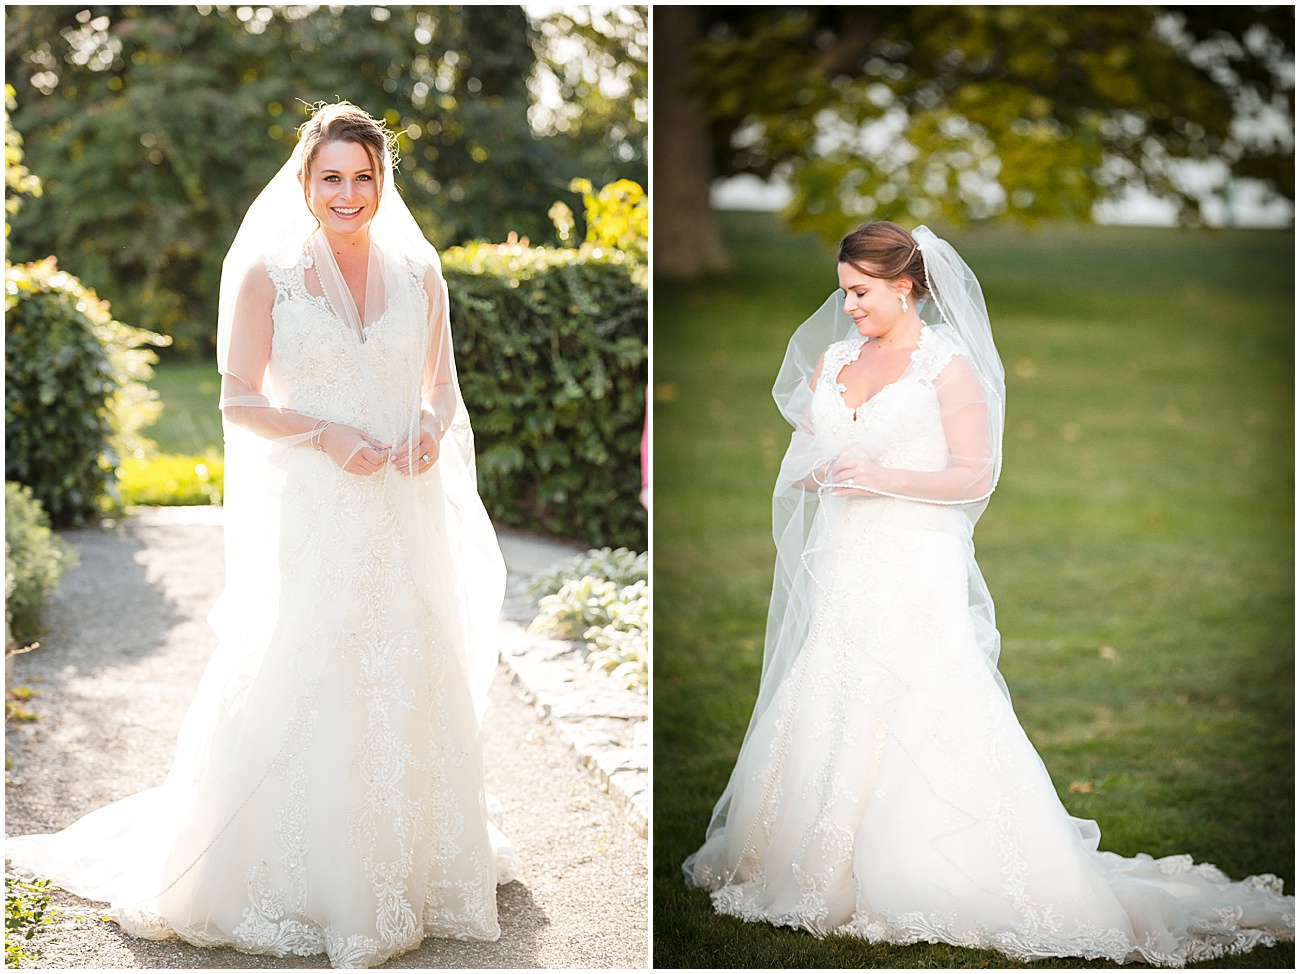 Bridal Potraits at Eolia Mansion Wedding in Waterford CT by Jamerlyn Brown Photography